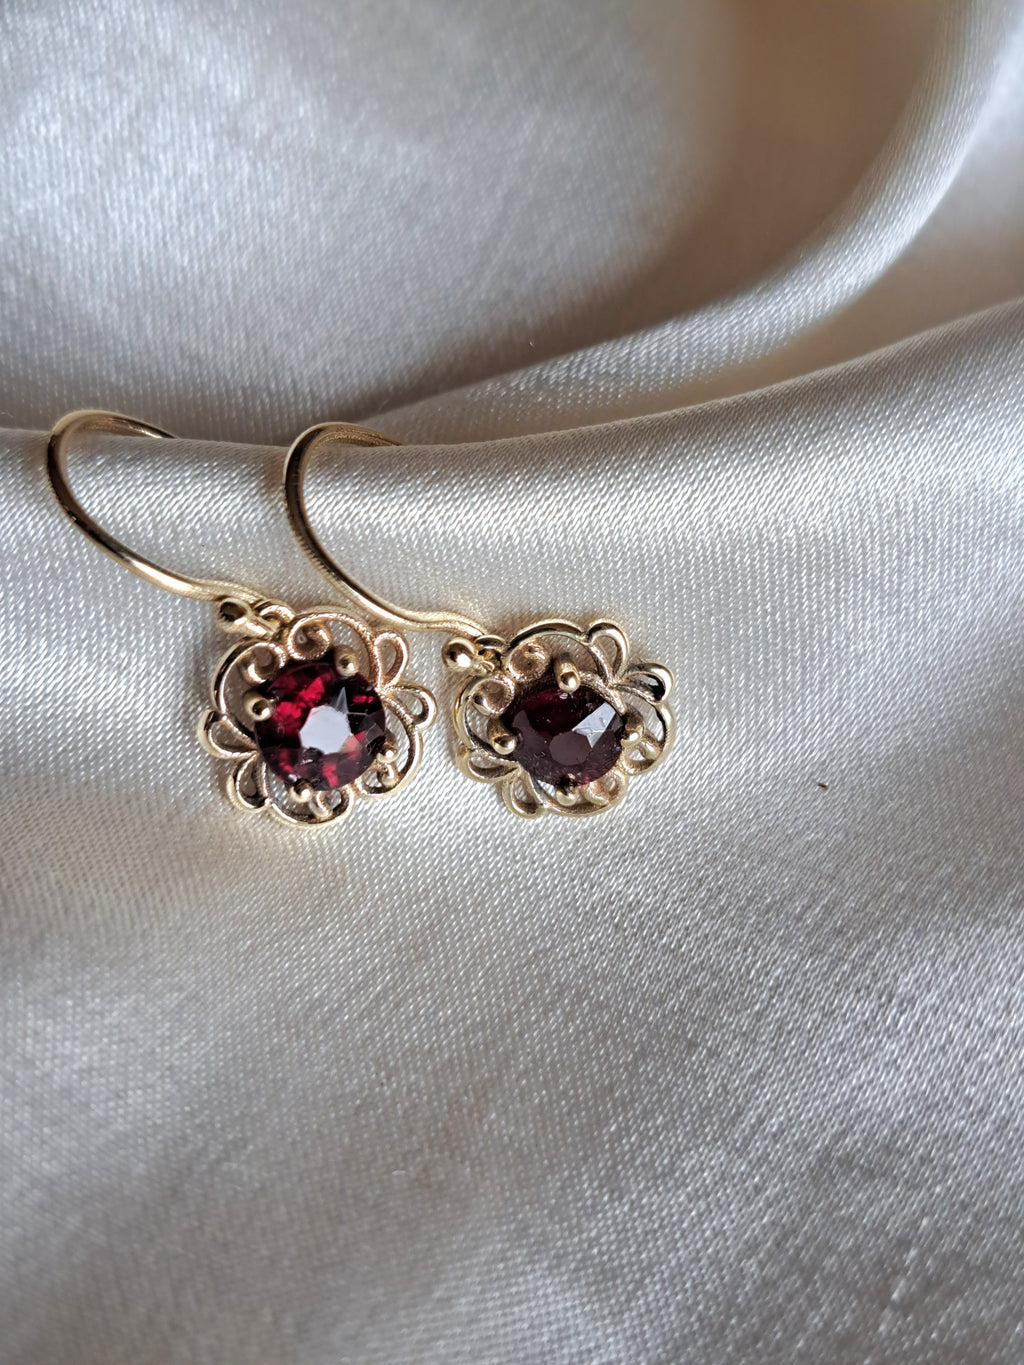 Solid 9crt Yellow gold garnet floral earrings